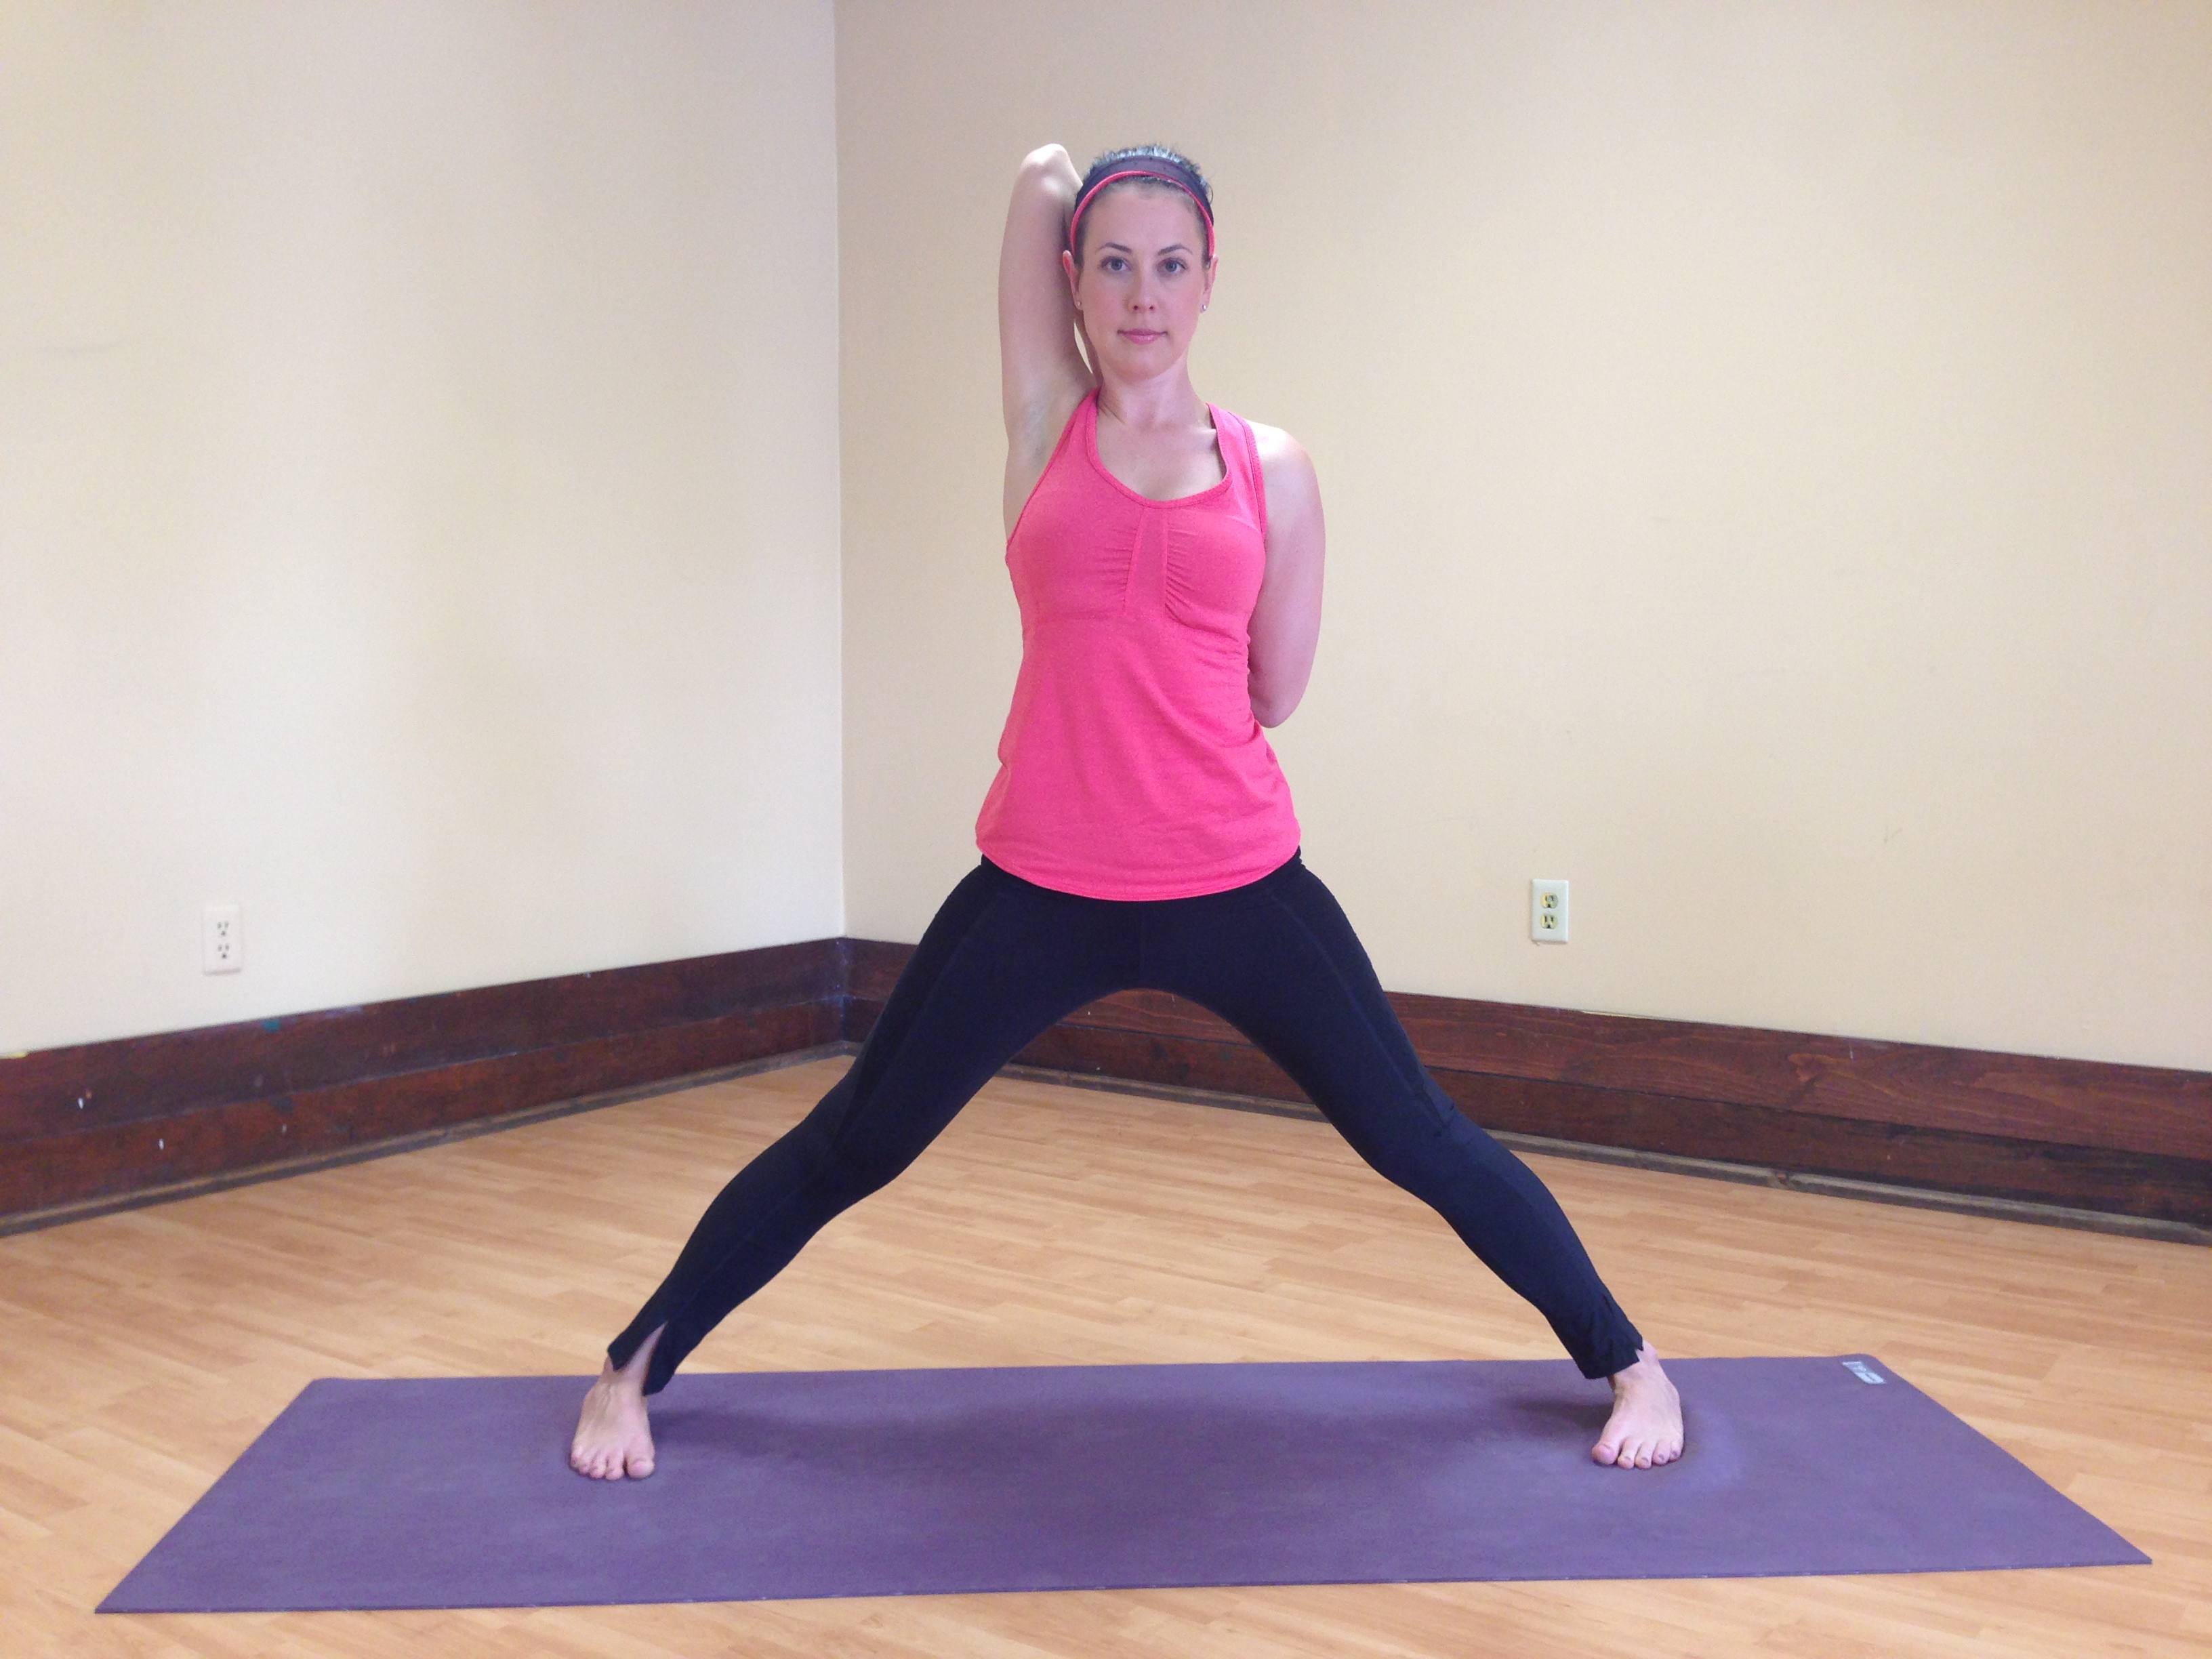 What is the most difficult yoga pose you have been able to master